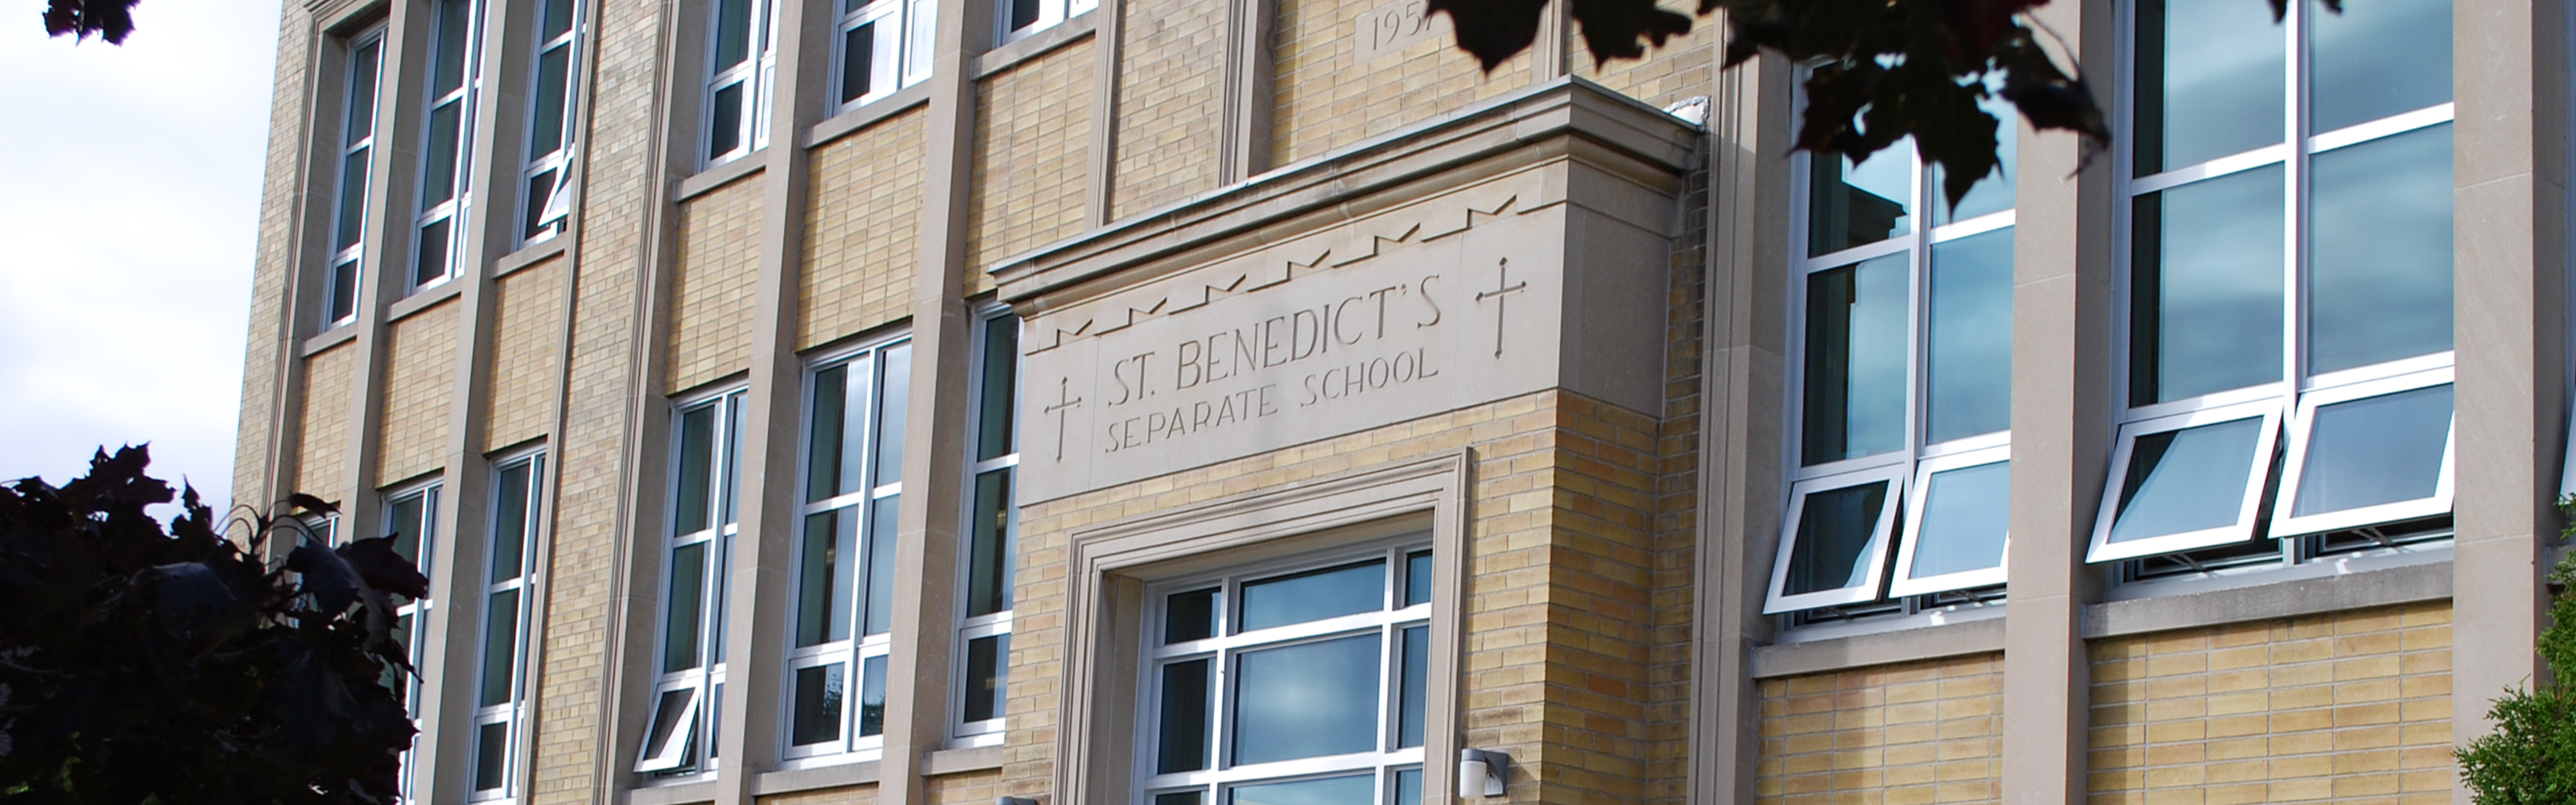 The front of the St. Benedict Catholic School building.